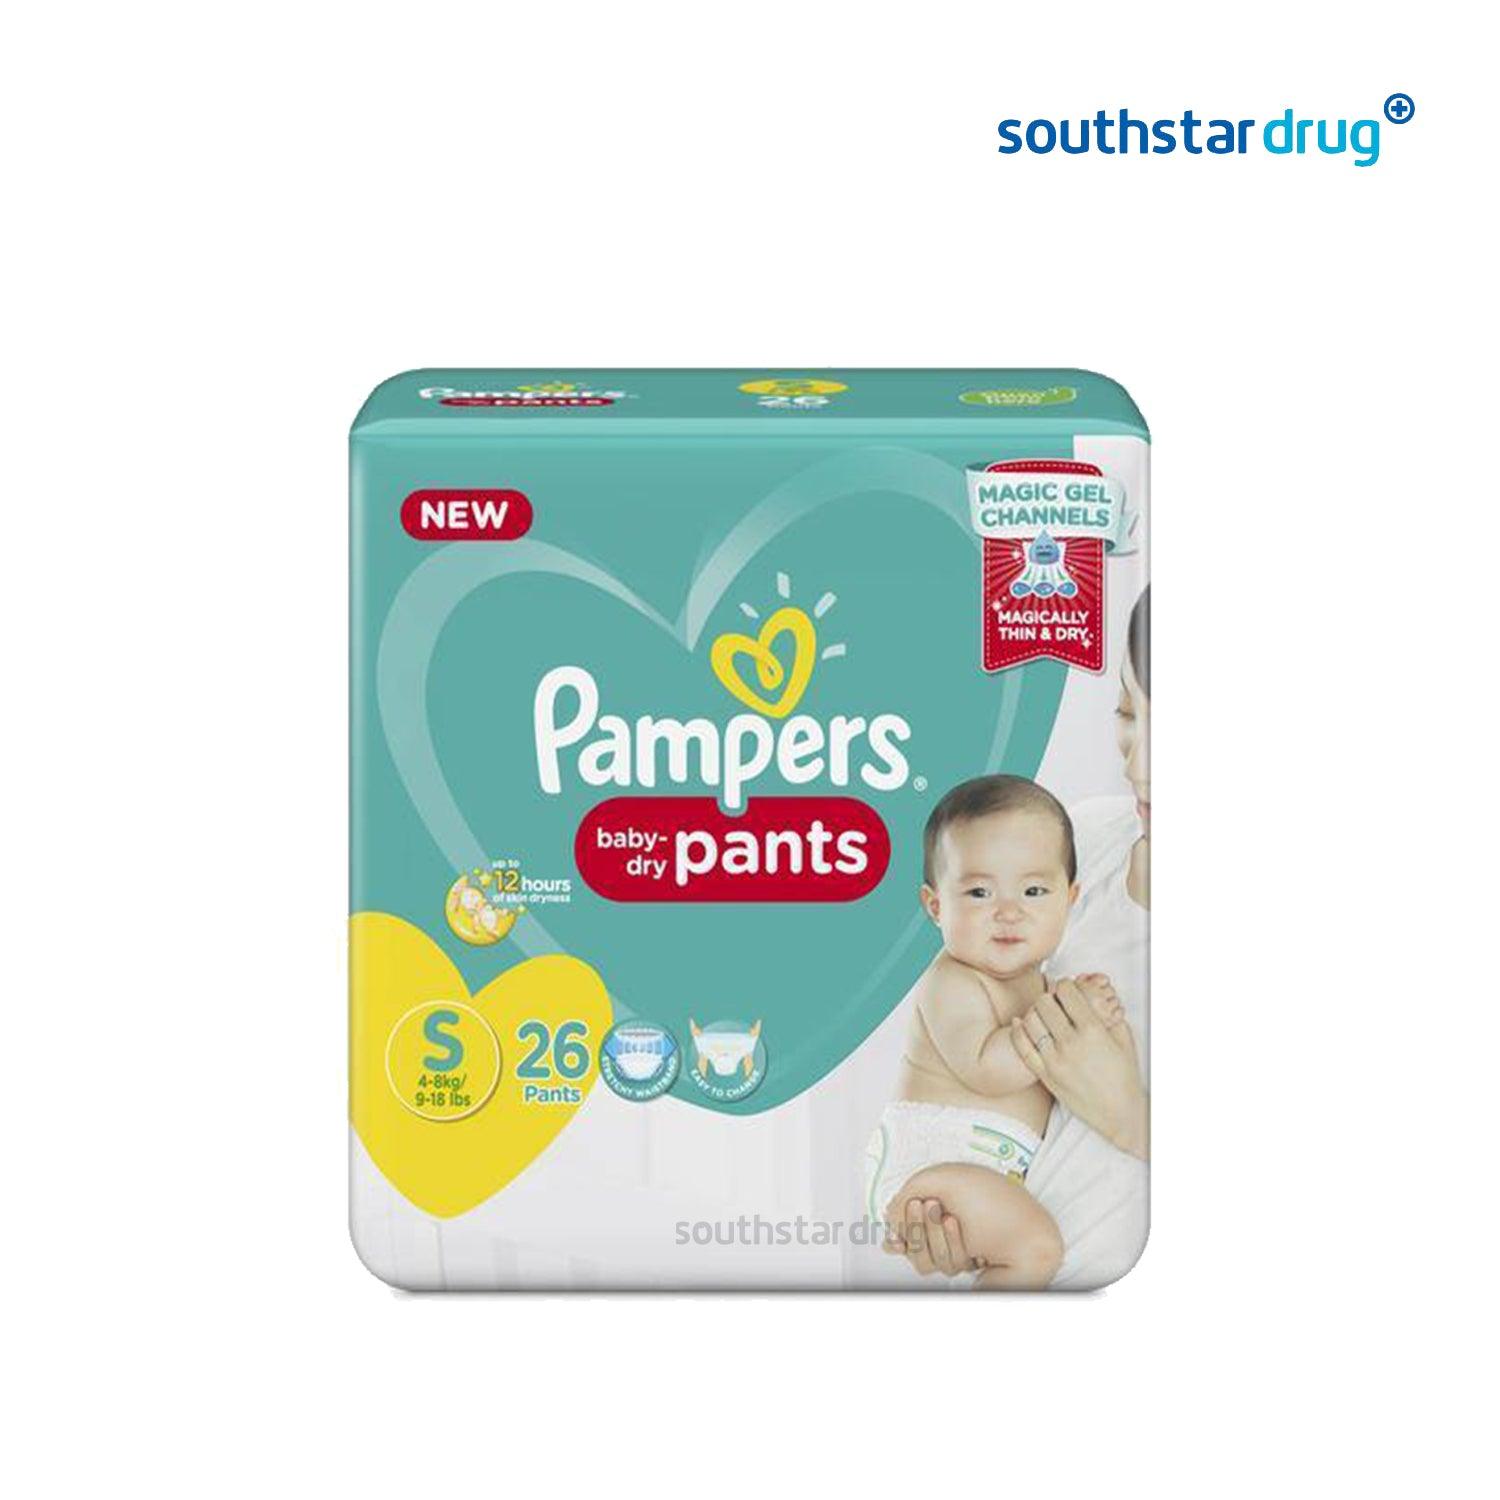 Buy Pampers Baby Dry Pants Value Small 40s Online | Southstar Drug